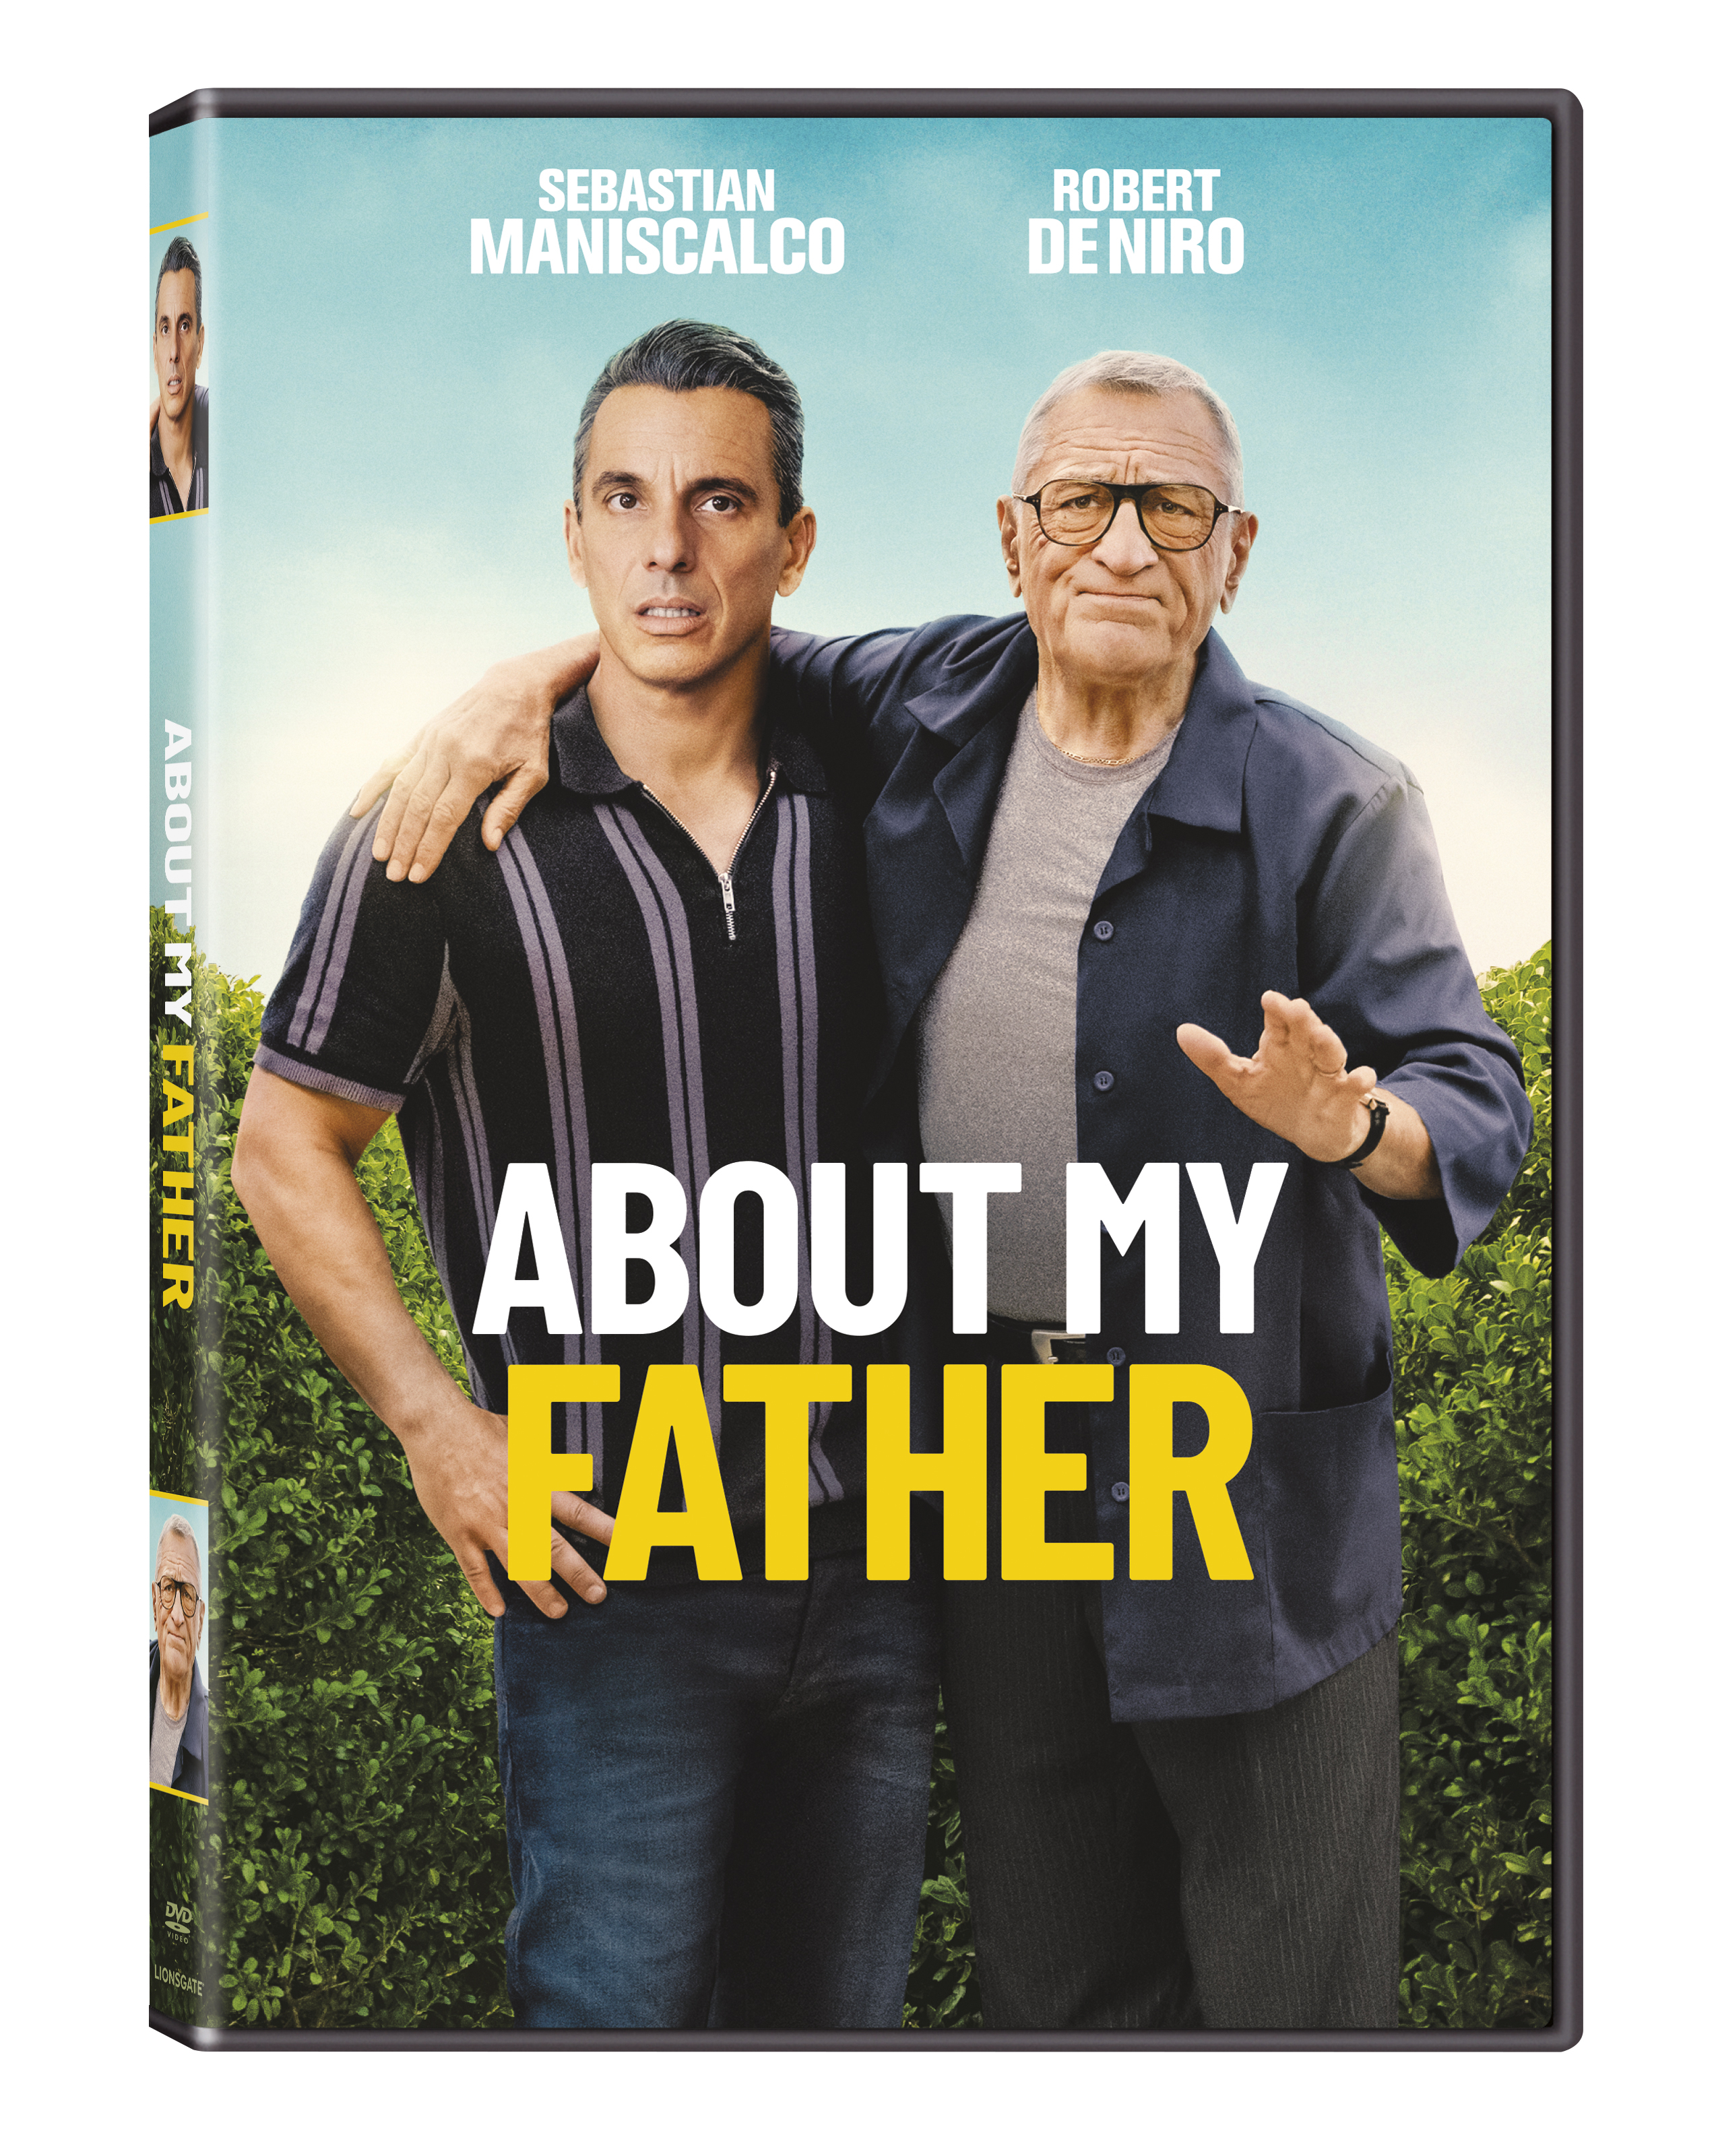 About My Father DVD cover (Lionsgate)